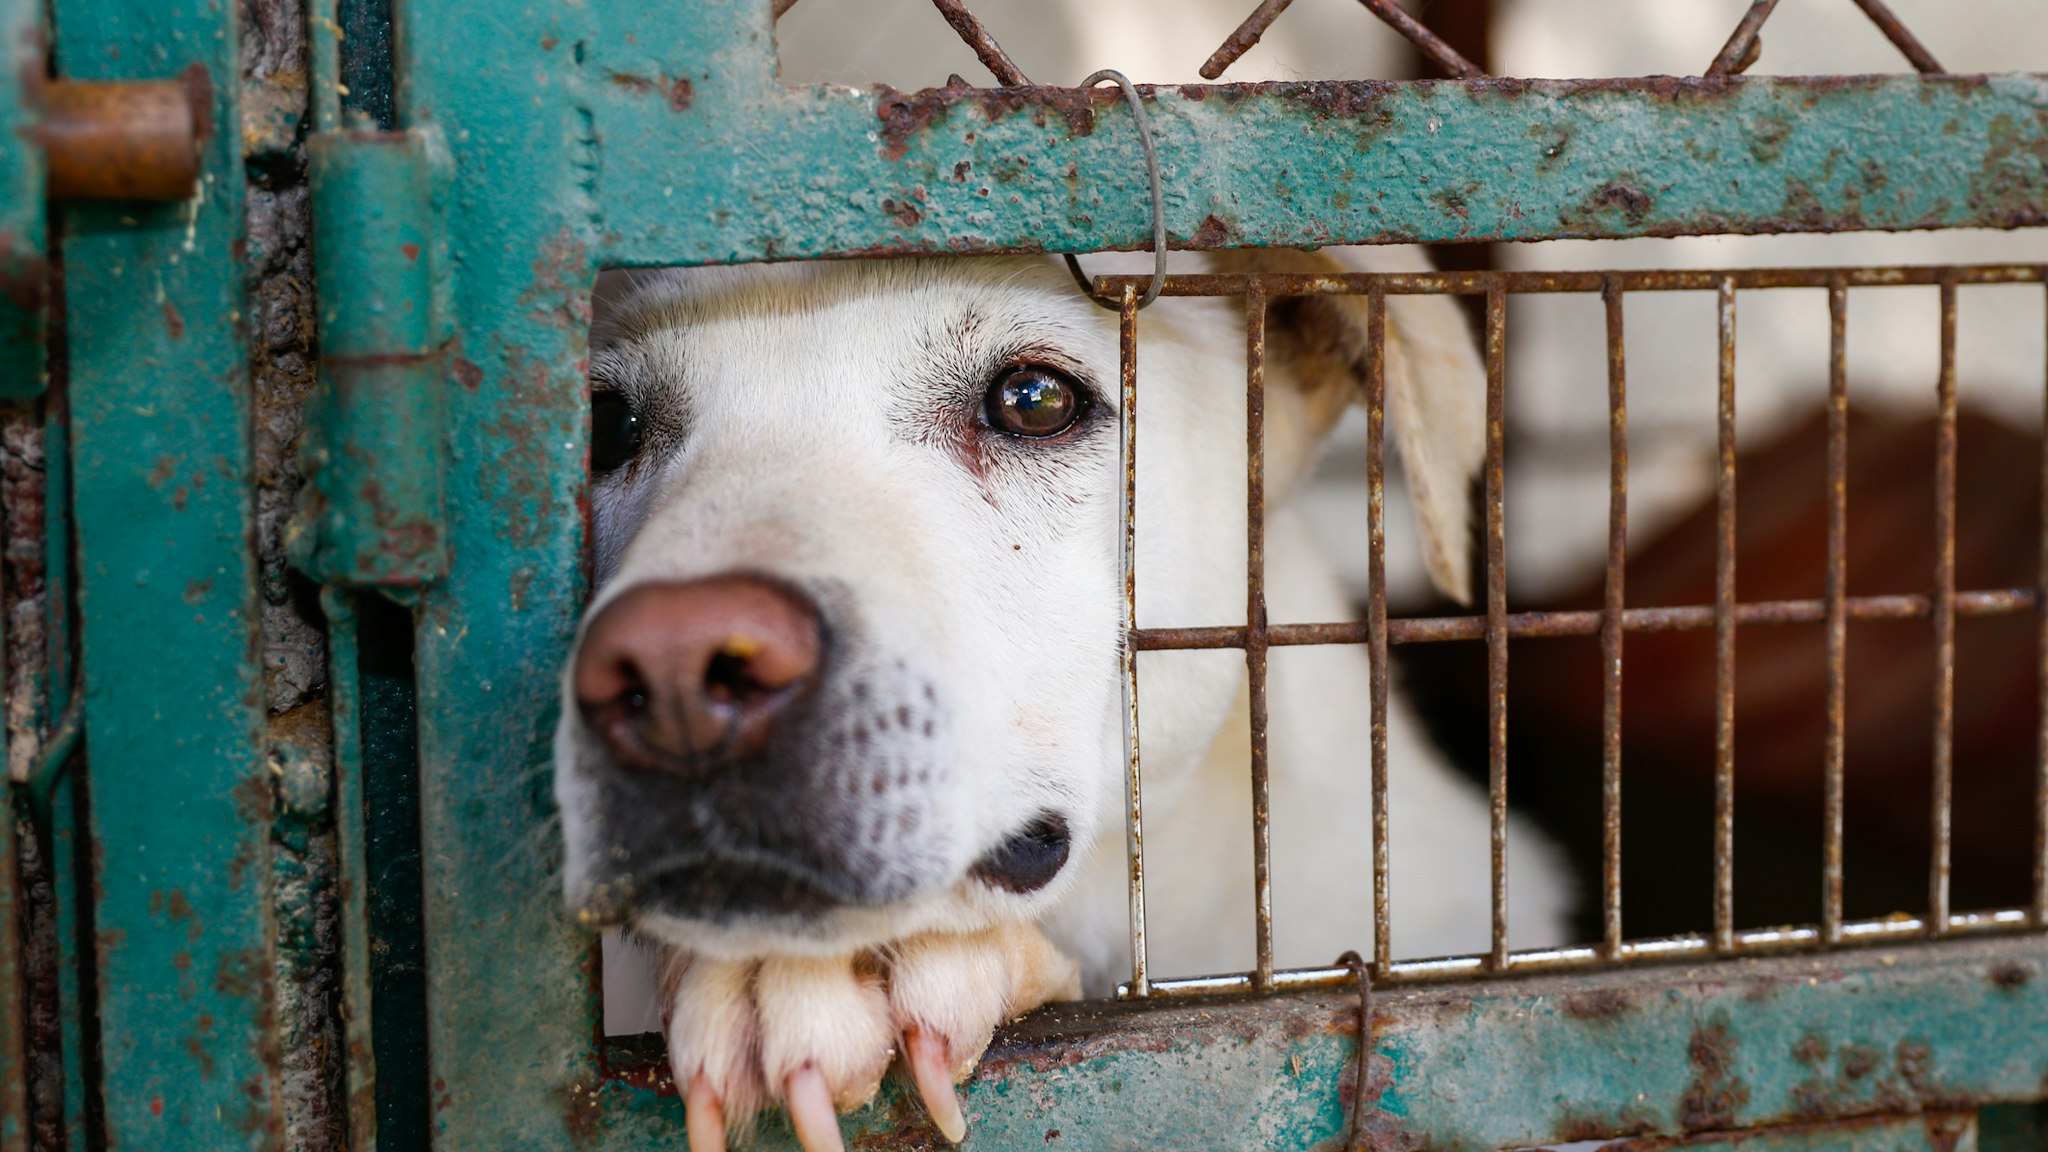 A mixed-breed dog looking sad behind a fence in a dog shelter in Mexico City - stock photo